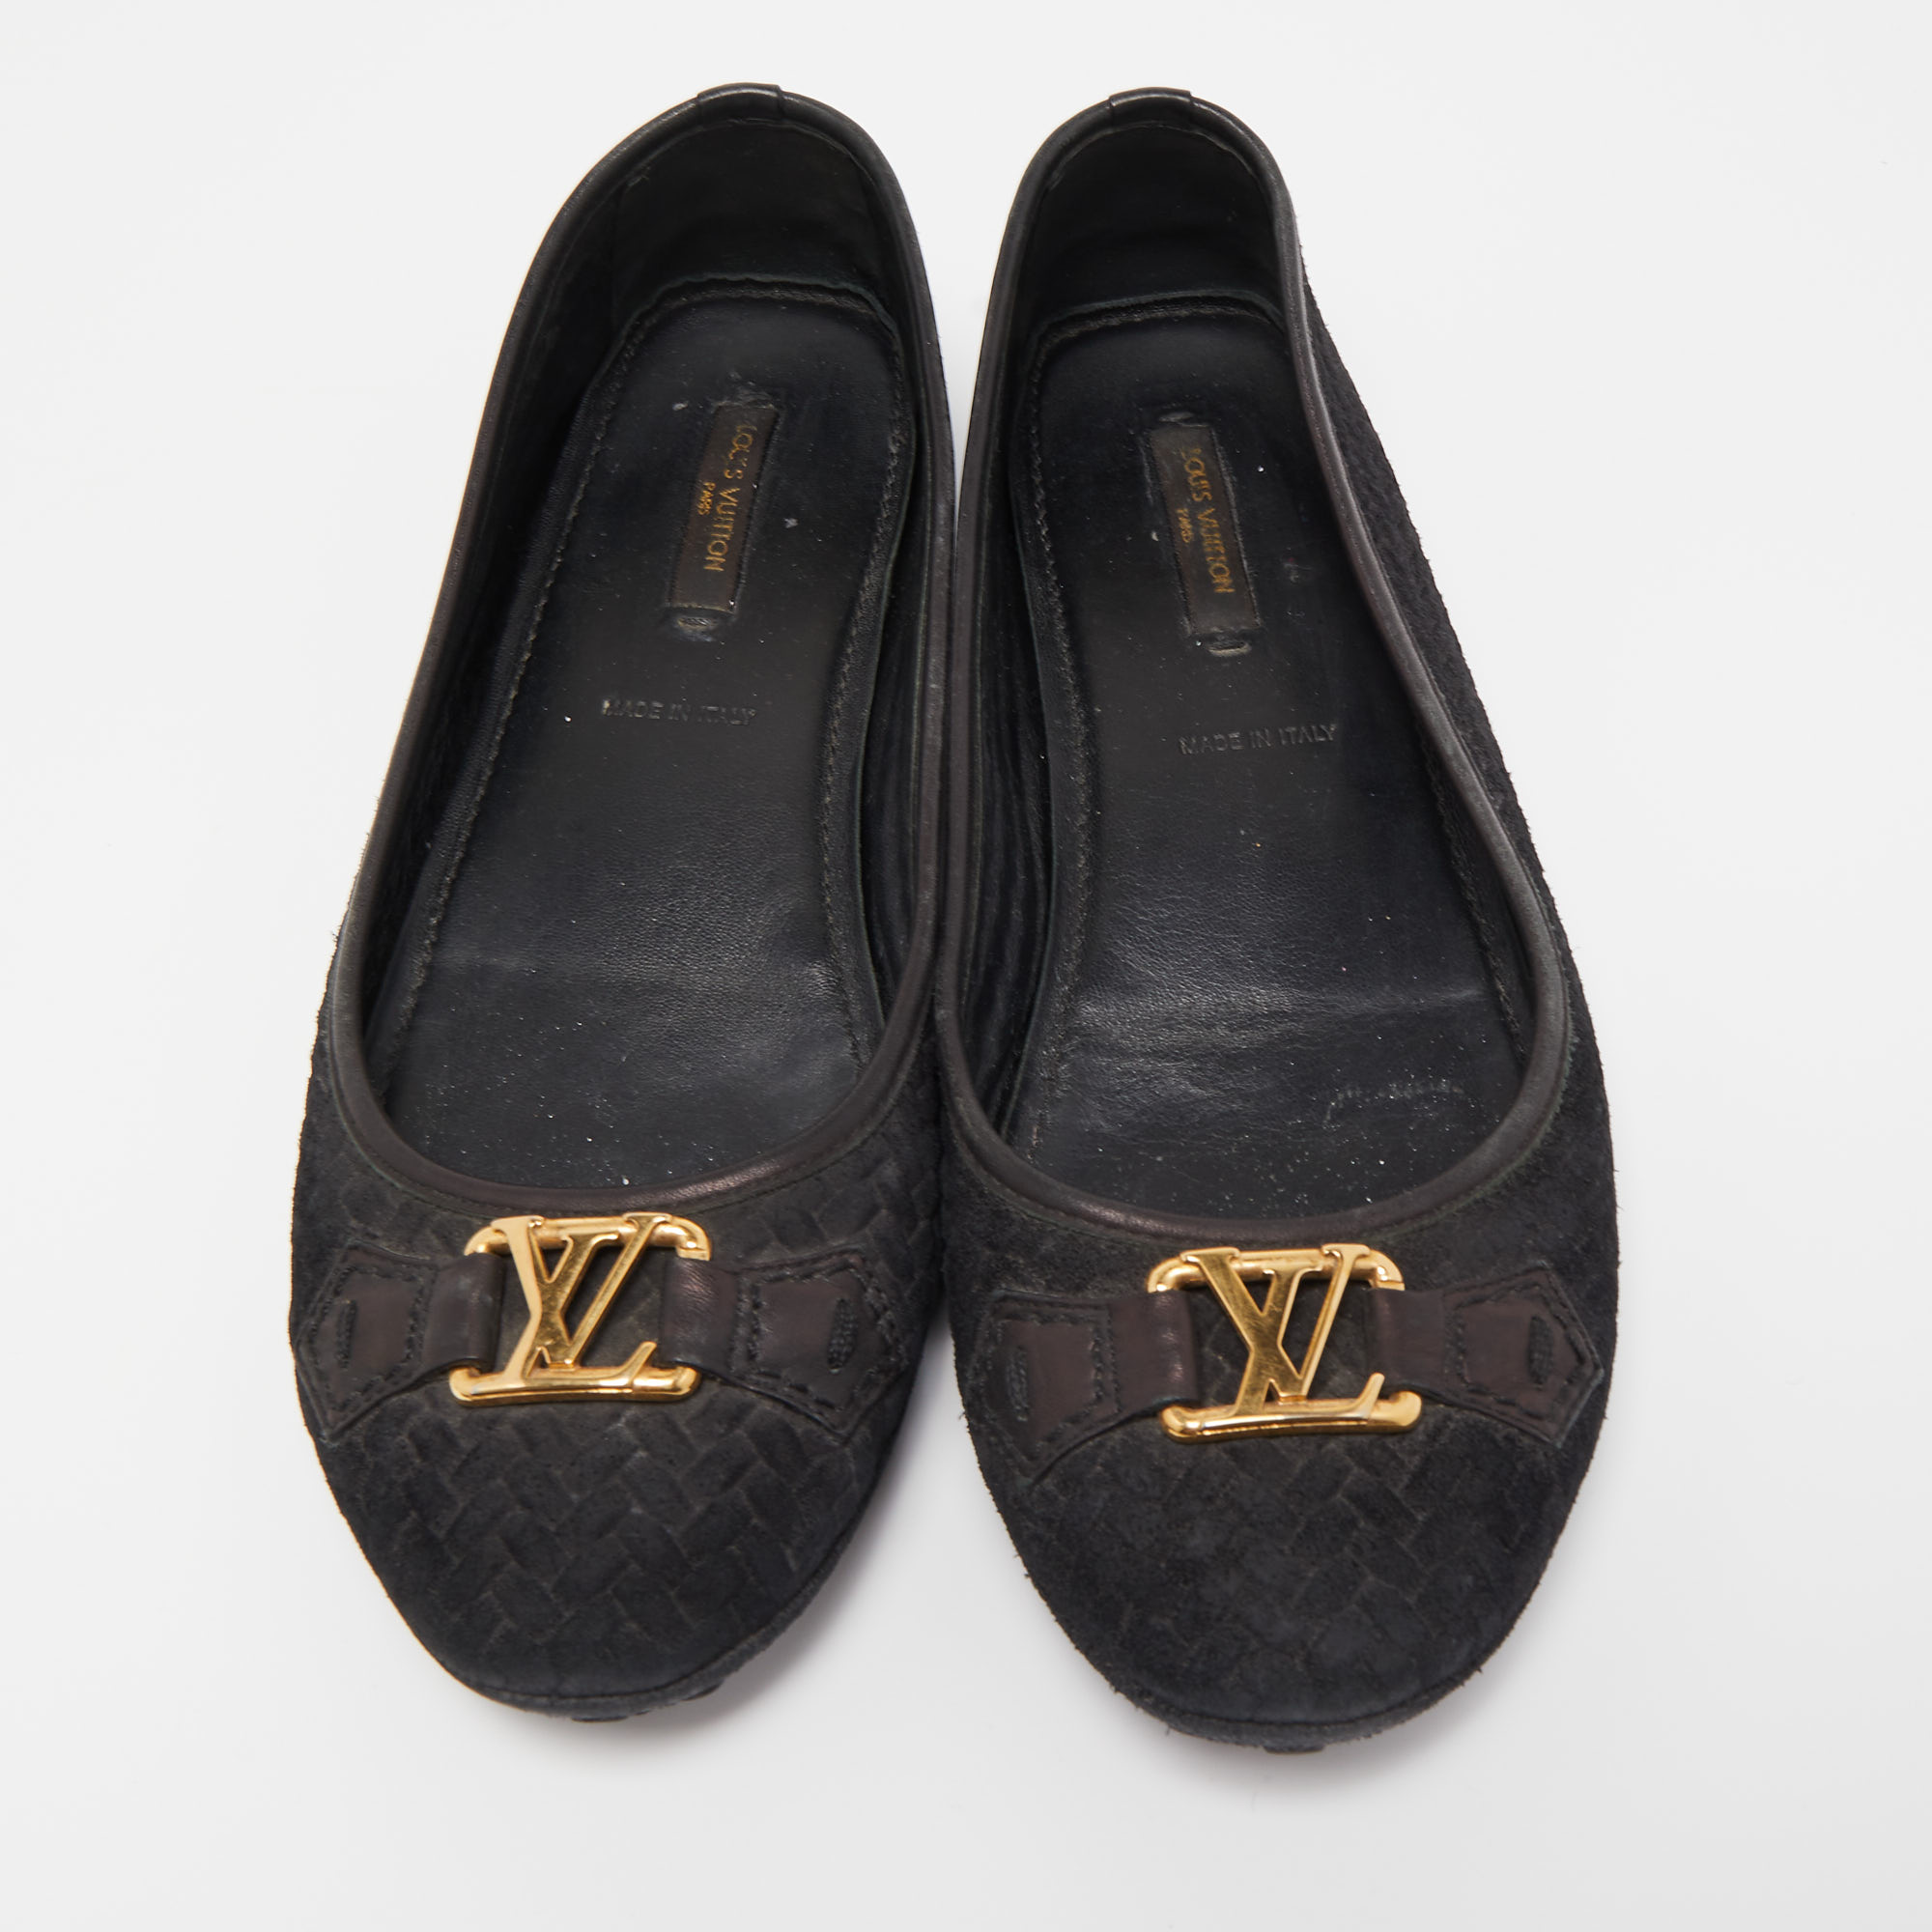 Louis Vuitton Black Woven Suede Oxford Loafers Size 38.5